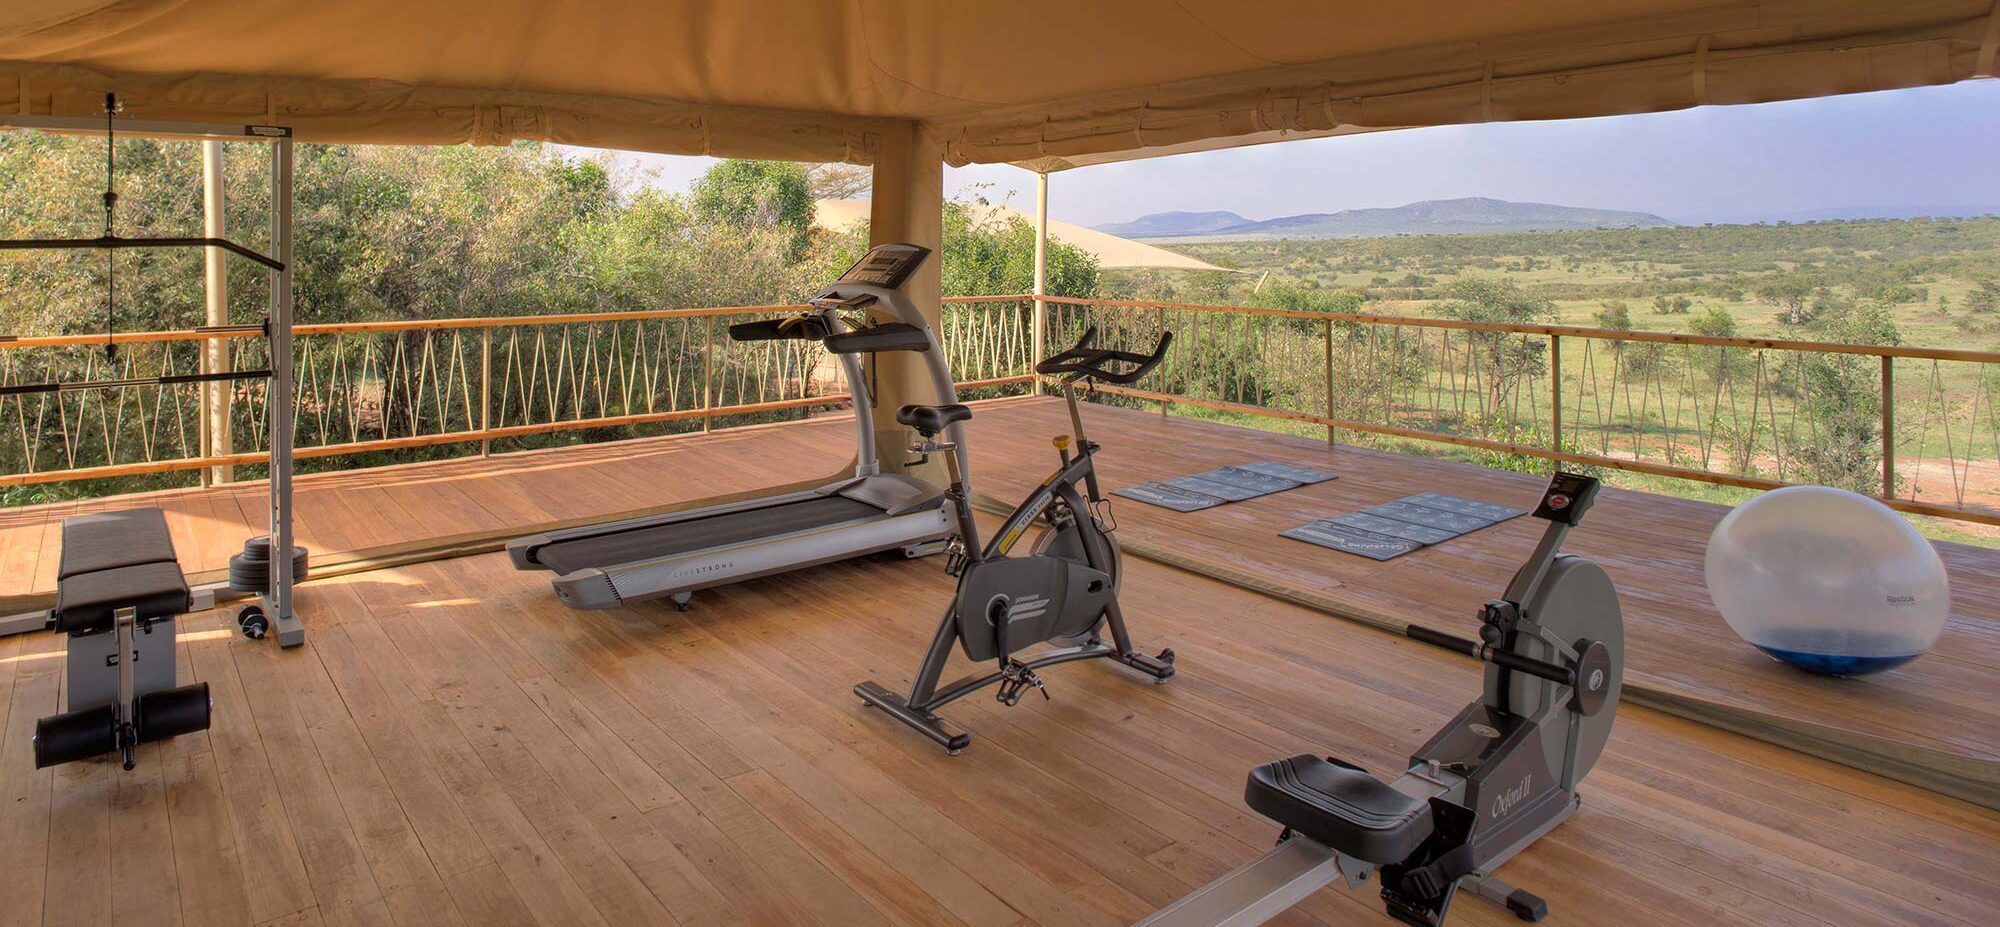 Gym equipment overlooking the views